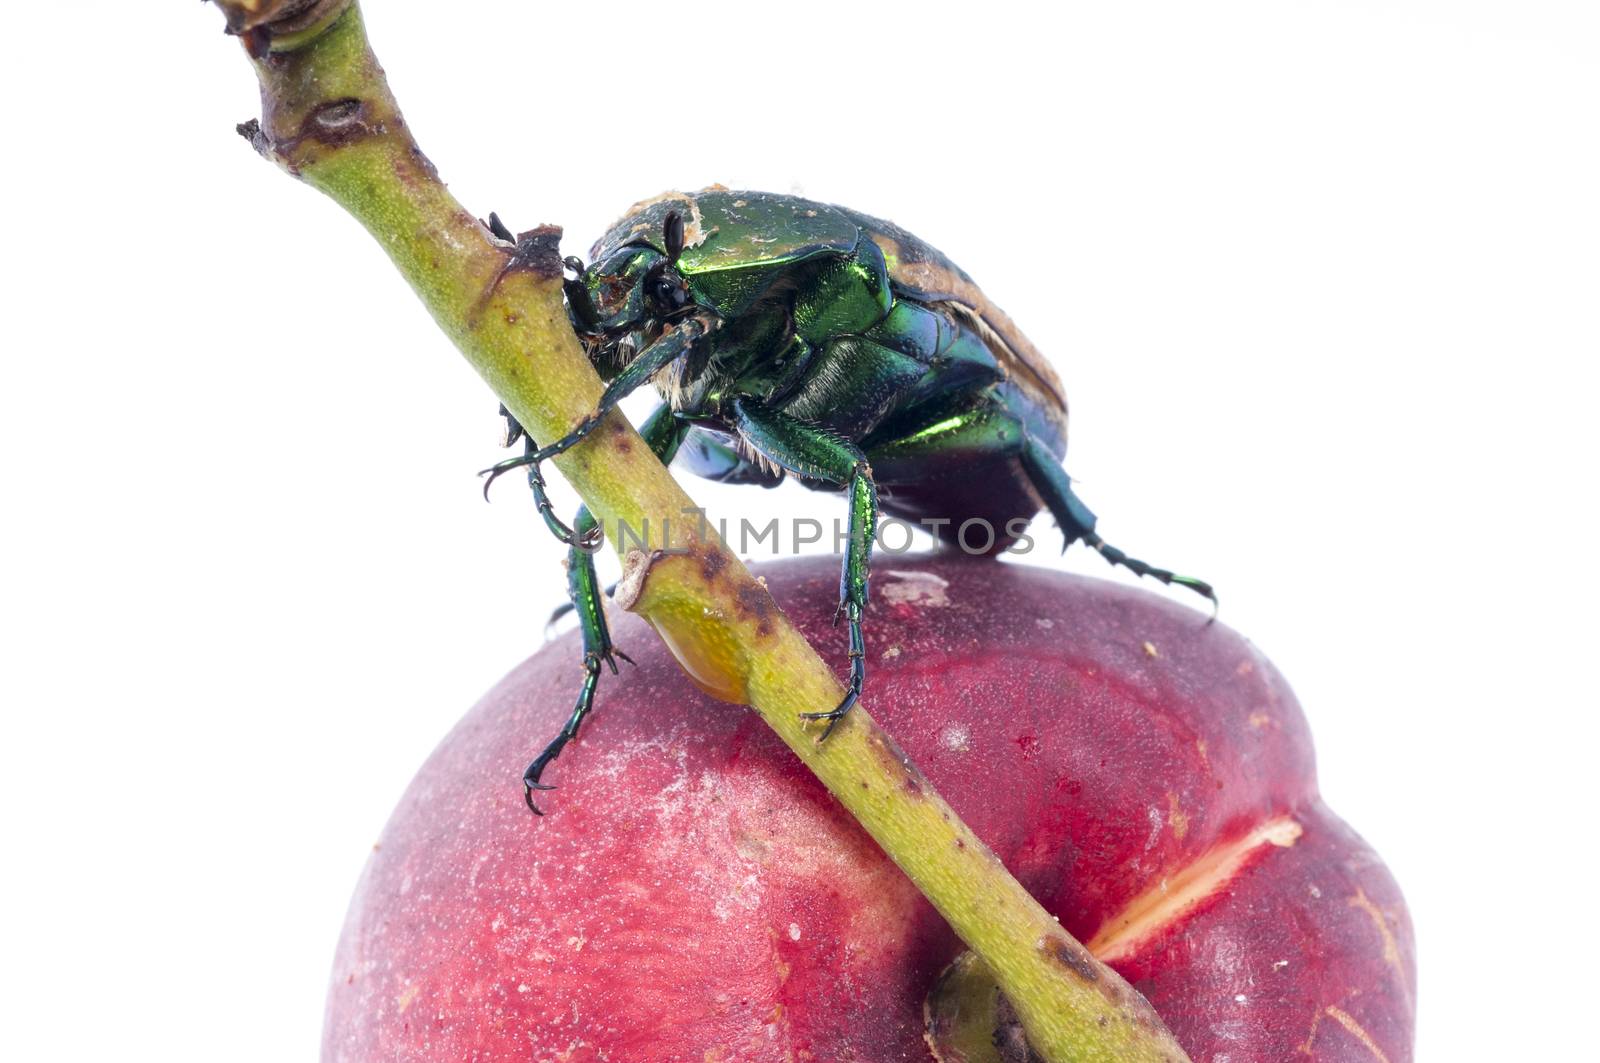 Mettalic green fig beetle (Cotinus texana) on apricot also called 'green fruit beetle', 'junebug', and 'figeater'). Common to the southwestern United States.